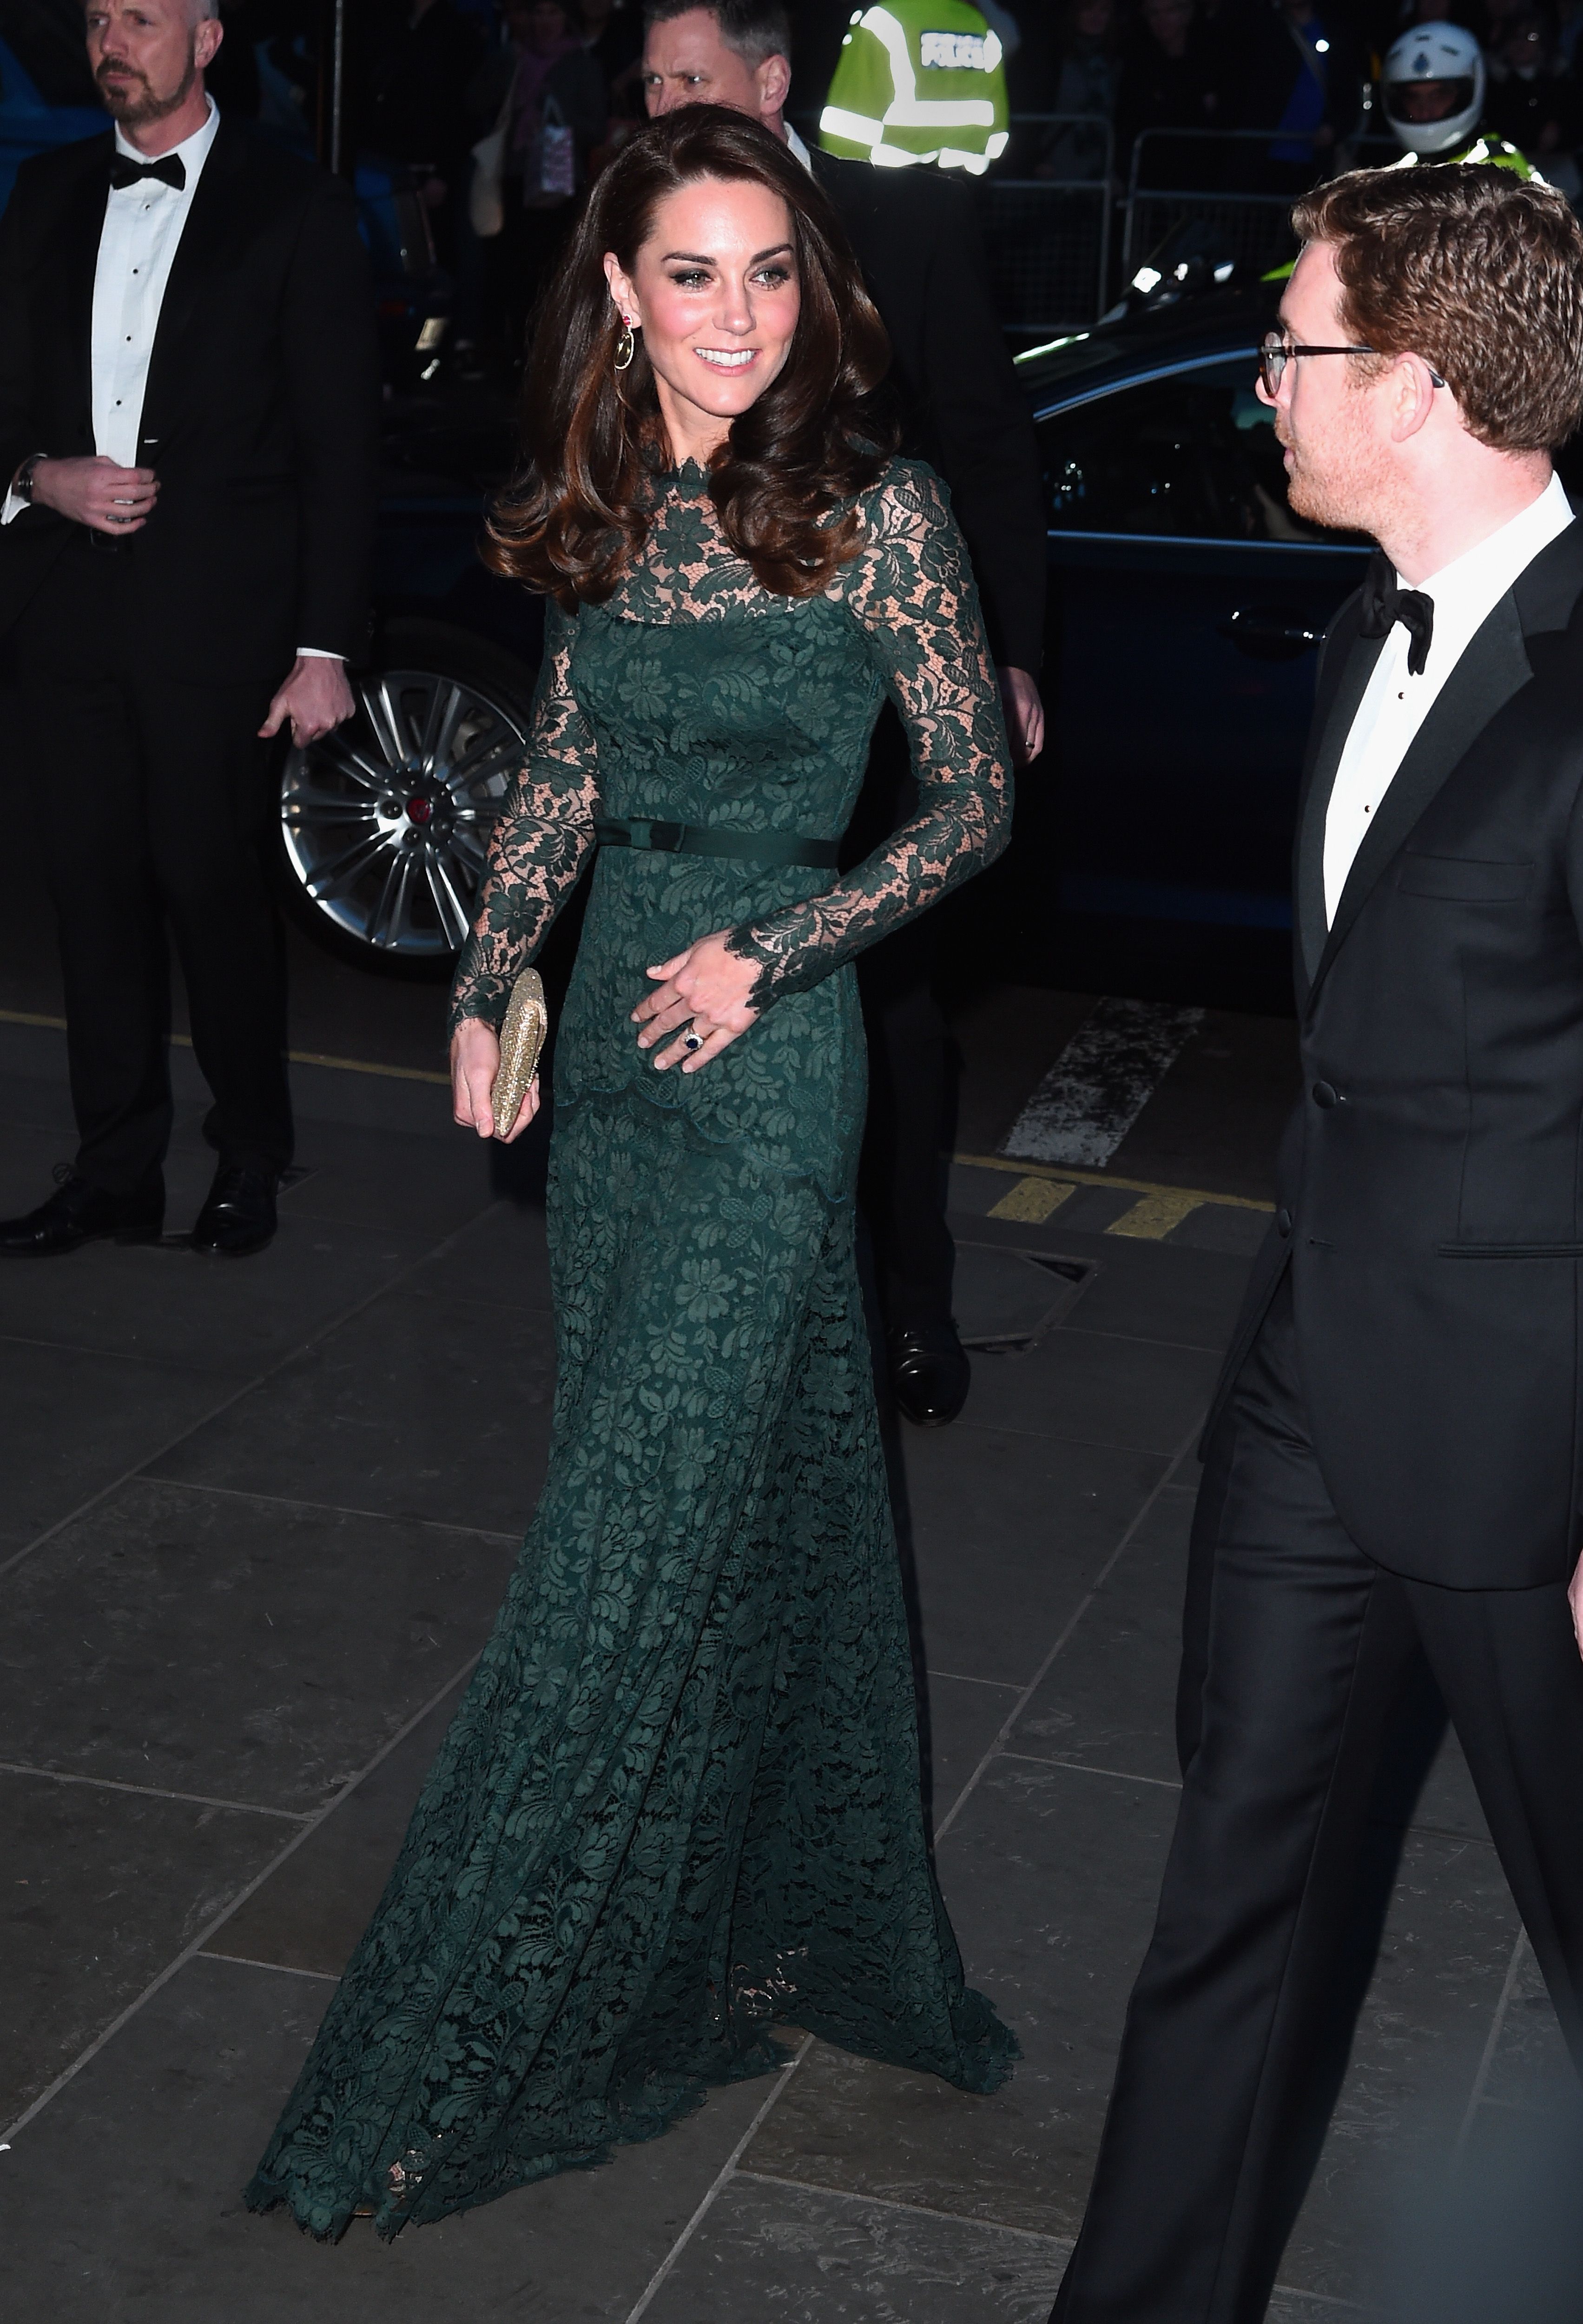 The Duchess of Cambridge looked stunning in a beige thigh-high slit gown on  her way to a dinner with Prince William